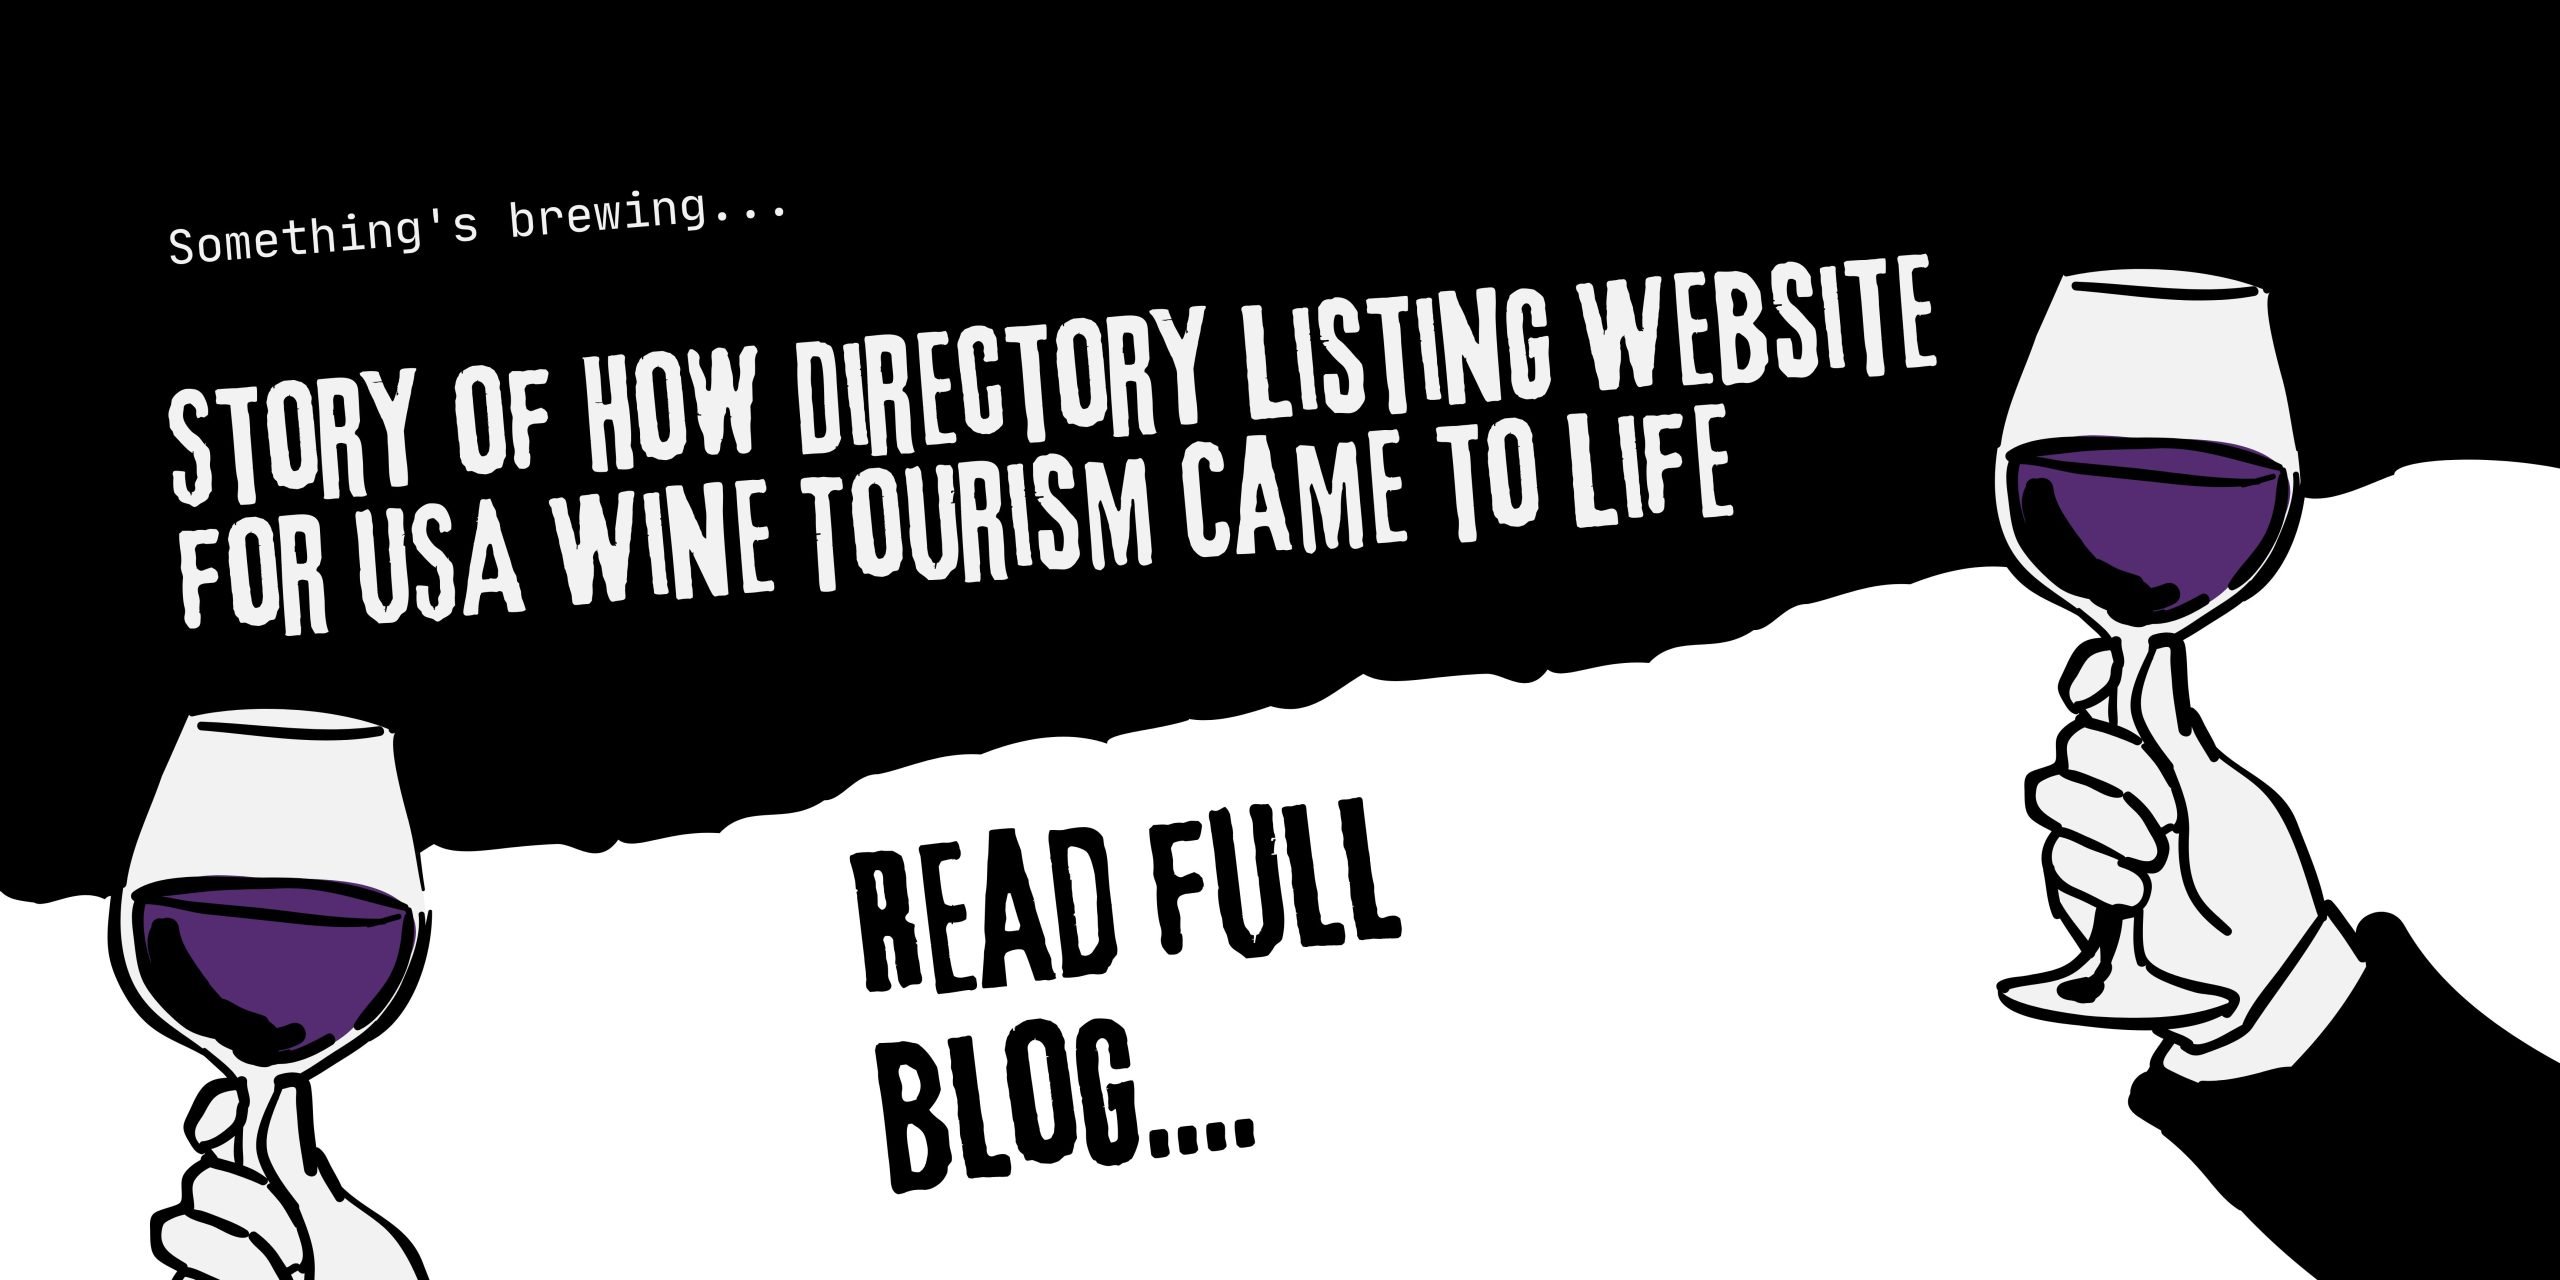 From Vision to Reality: The Story of How Directory Listing Website for USA Wine Tourism Came to Life